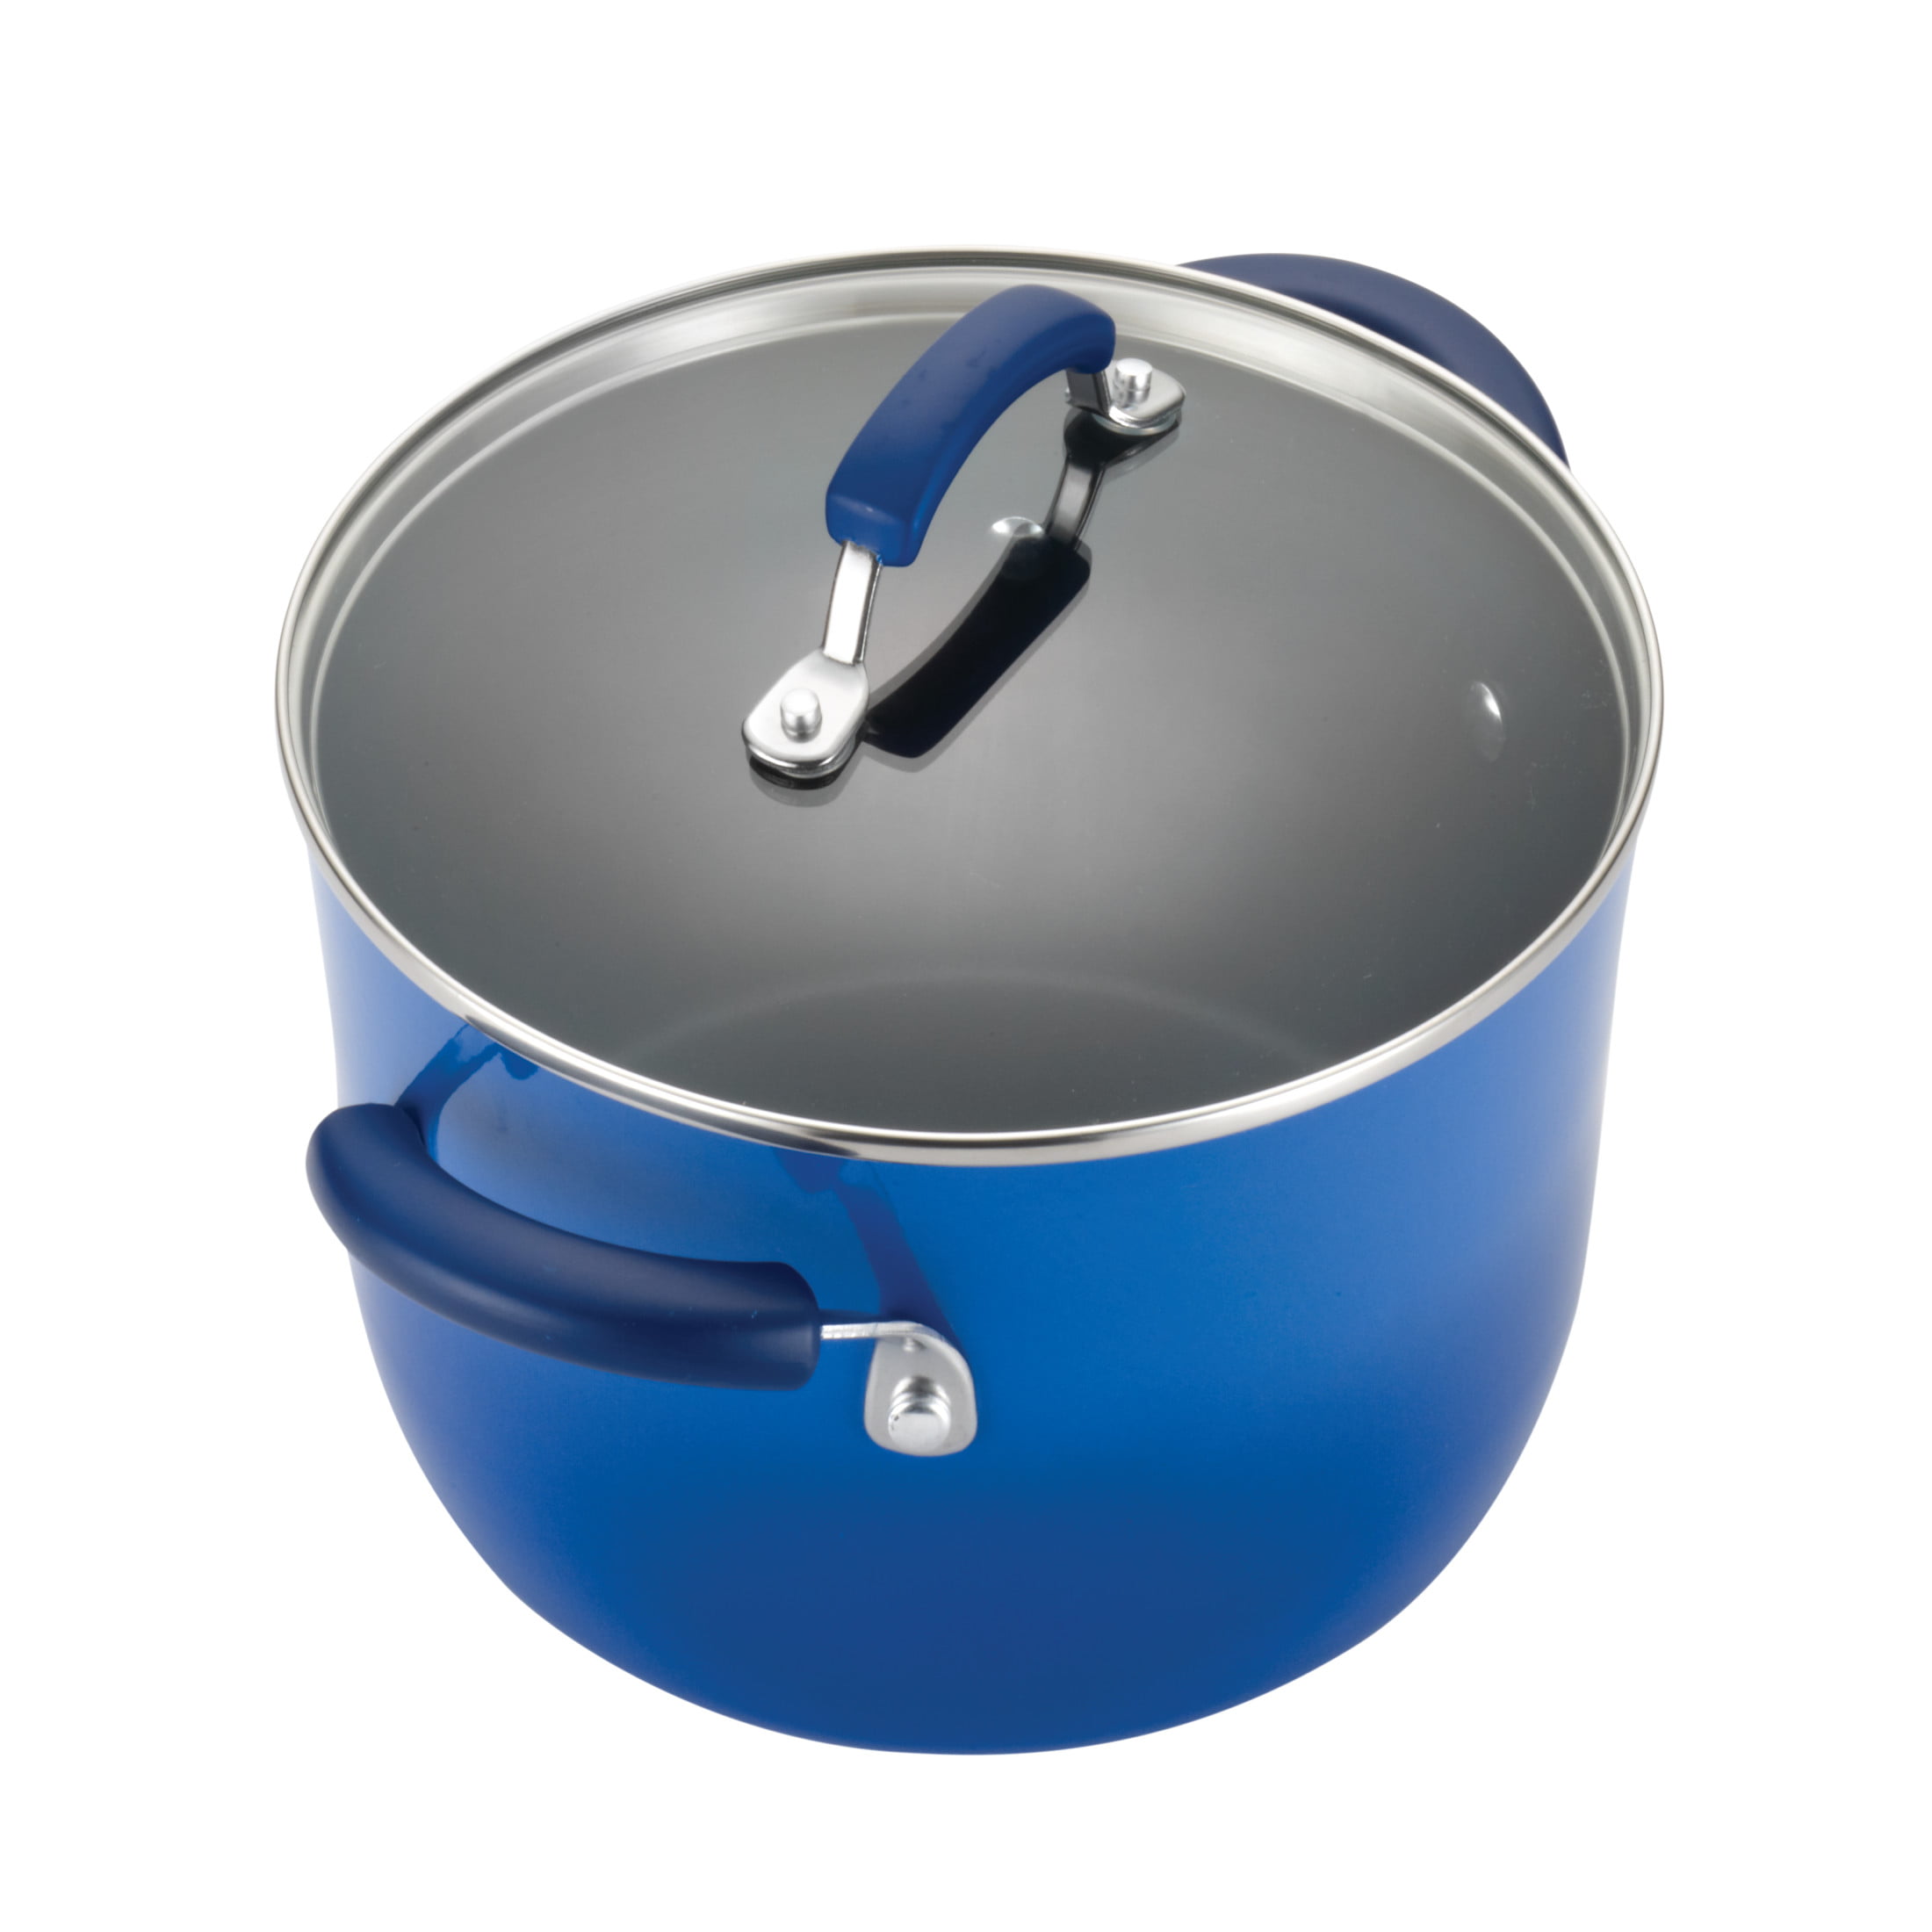  Rachael Ray Brights Nonstick Cookware Pots and Pans Set, 14  Piece, Blue Gradient: Home & Kitchen